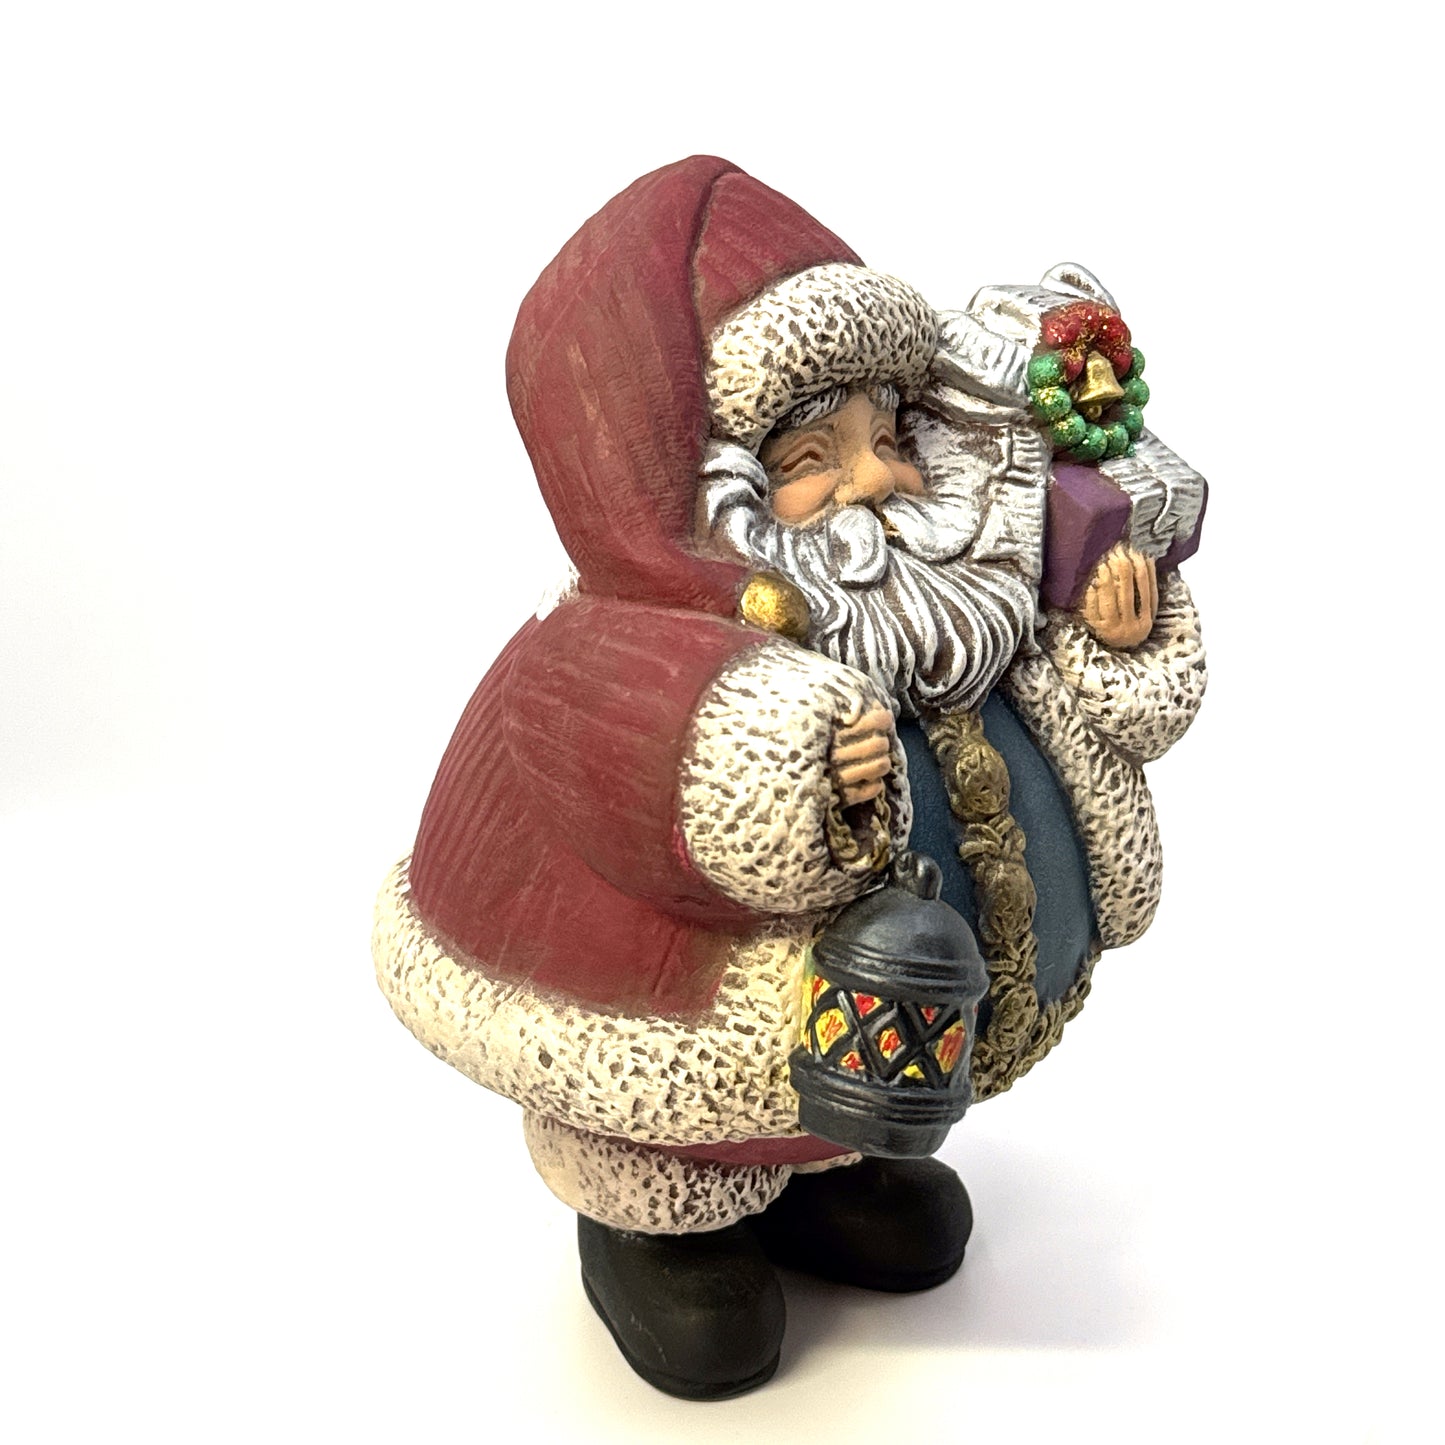 Vintage Gare Hand-Painted Christmas Holiday Ceramic Santa Claus Table-Top Decoration